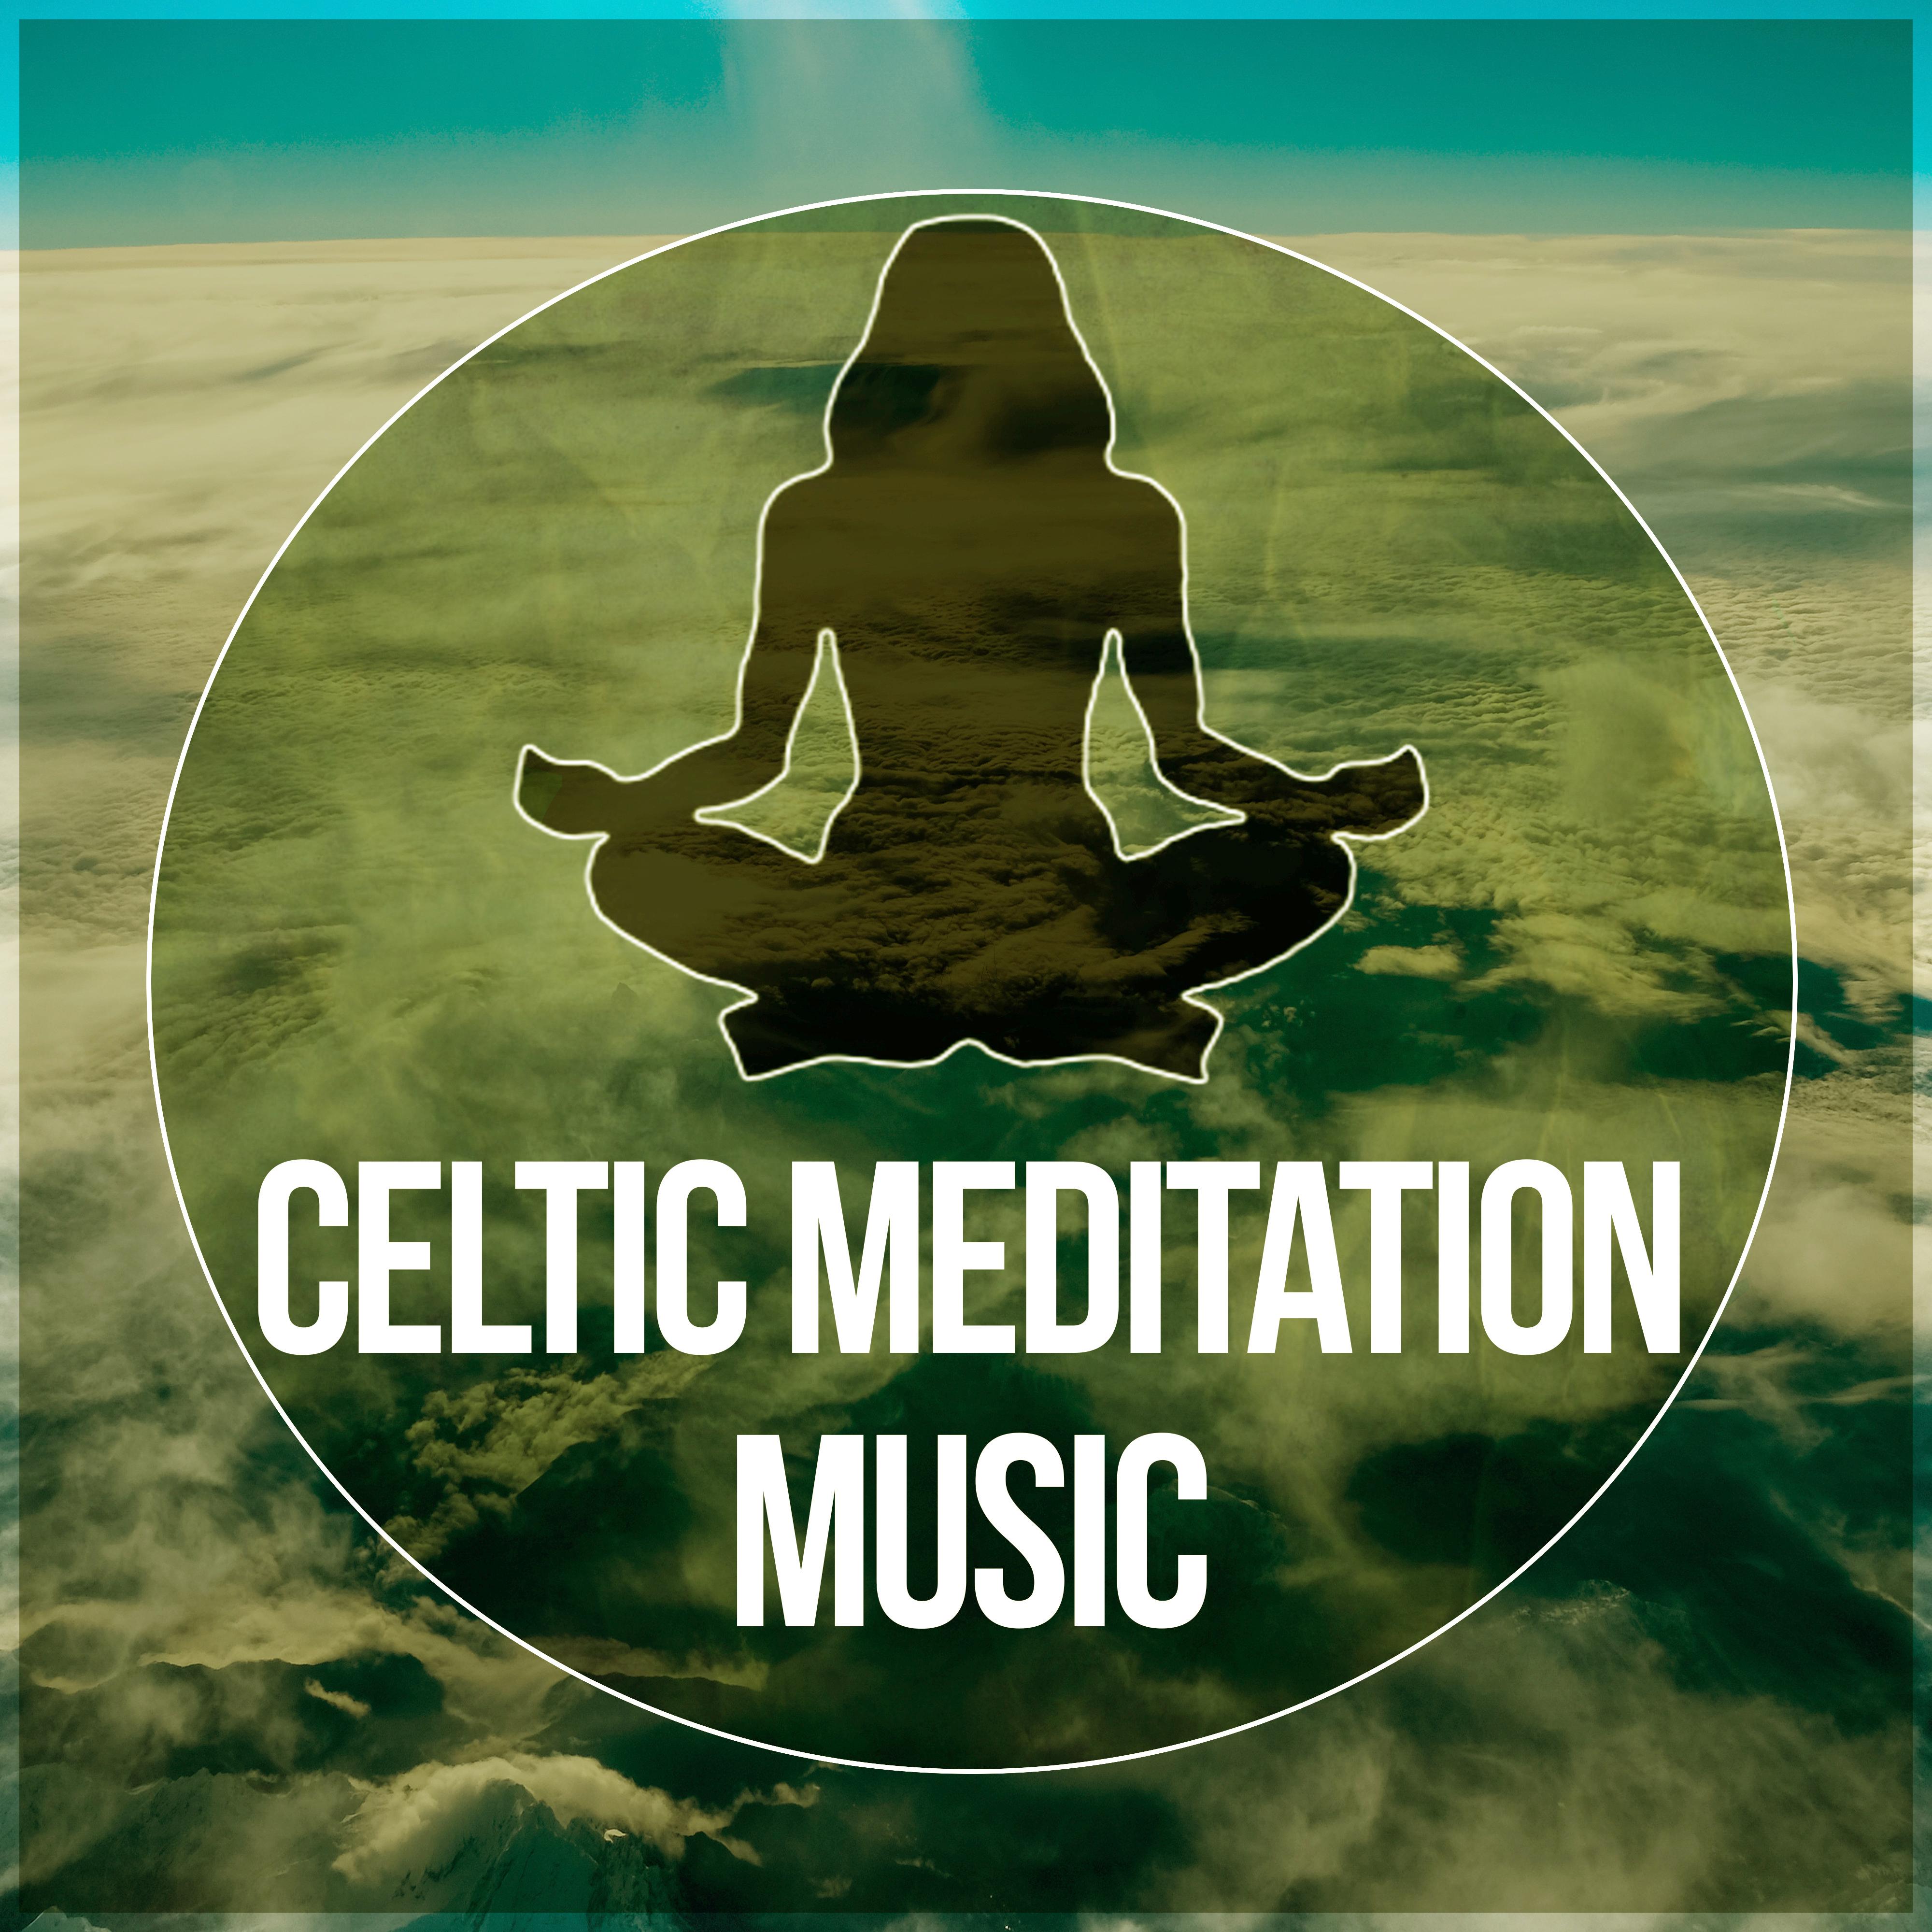 Celtic Meditation Music – Meditate In Peace, Sound Therapy for Stress Relief, In Harmony with Nature Sounds, Spa & Yoga, Chill Out Music